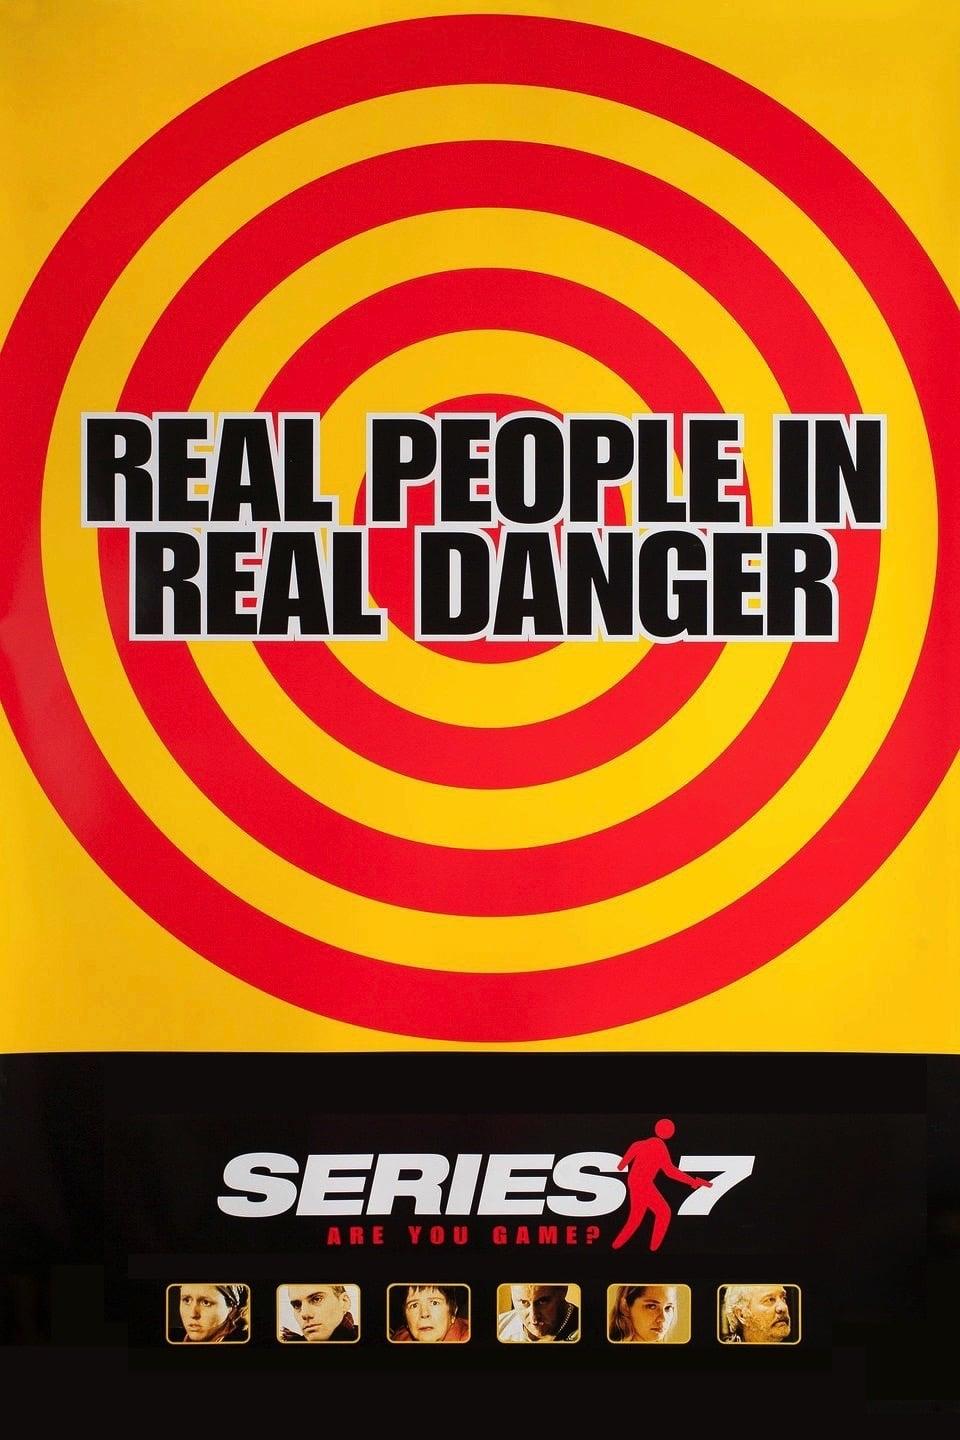 Series 7: The Contenders poster